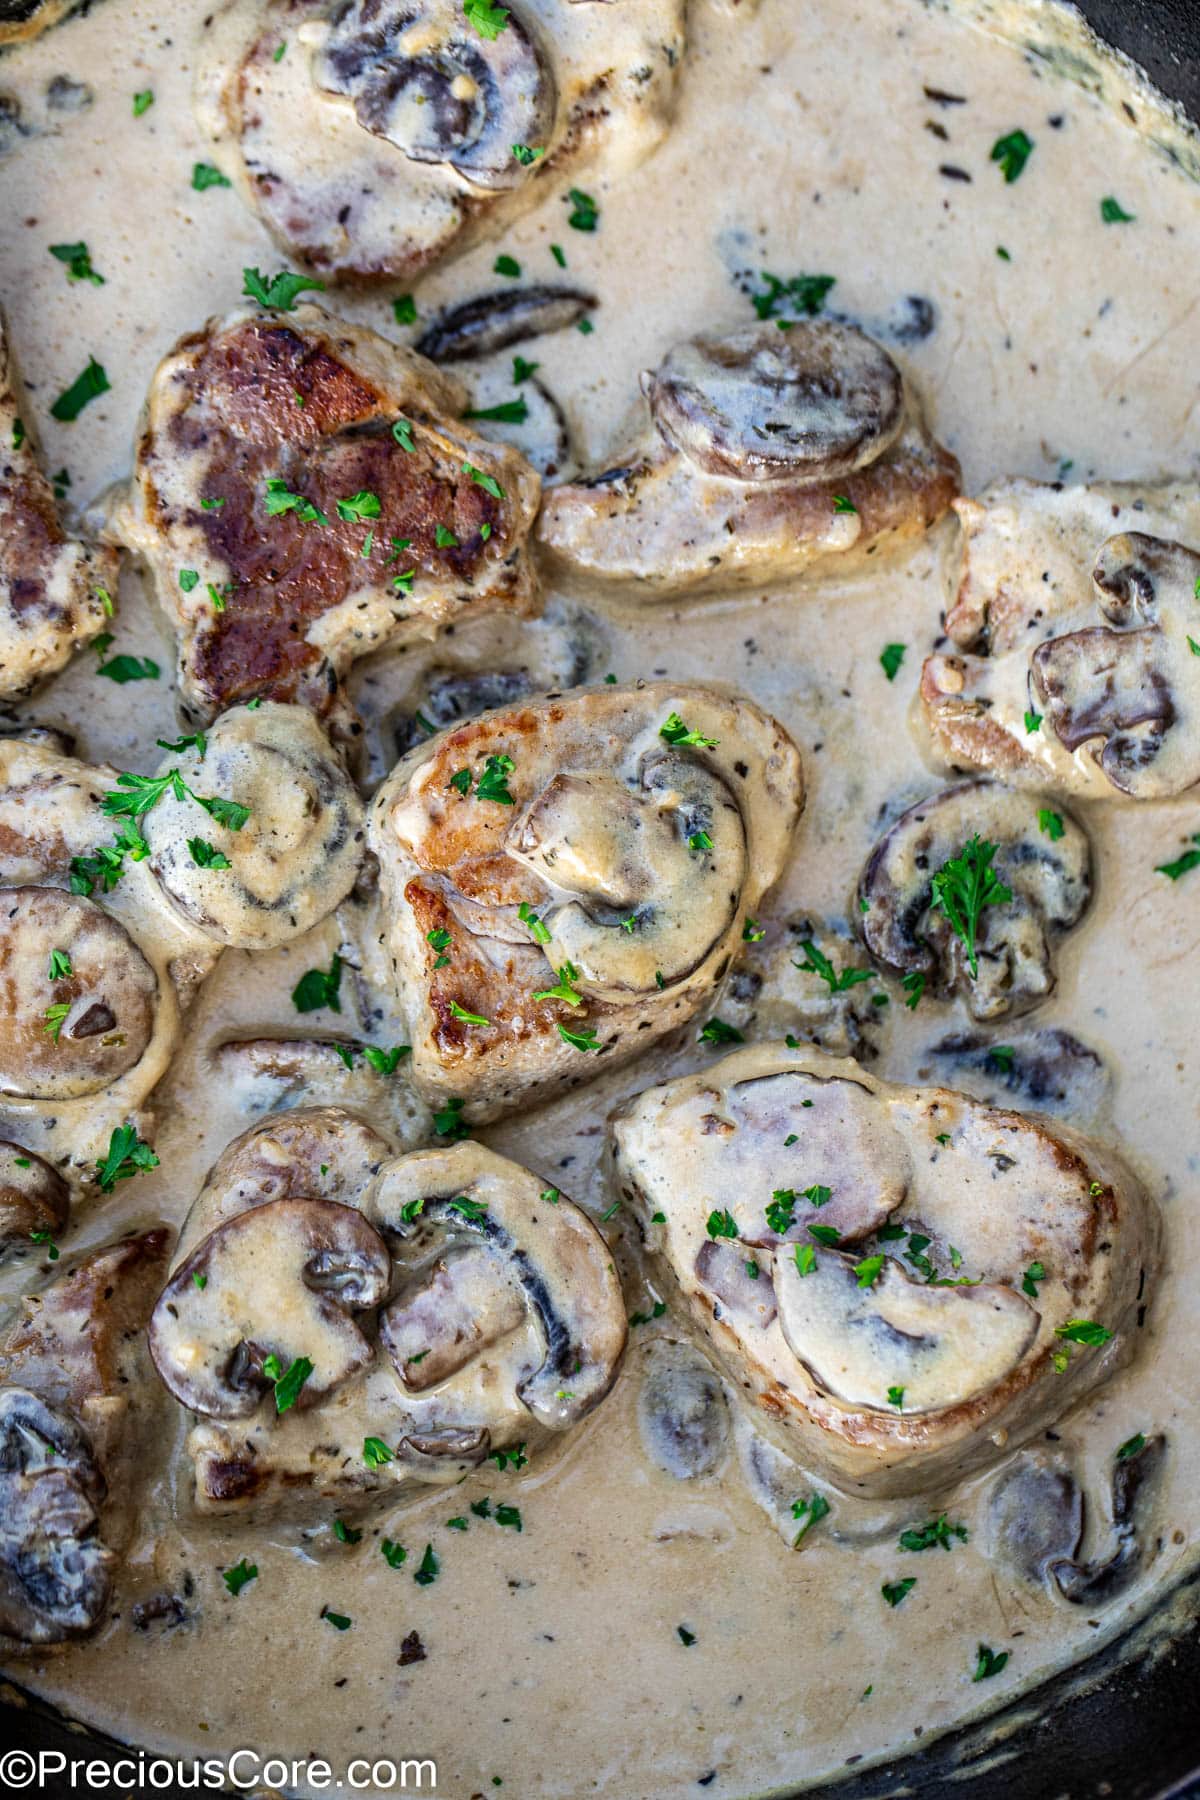 Cooked pork tenderloin in a creamy sauce with mushrooms.